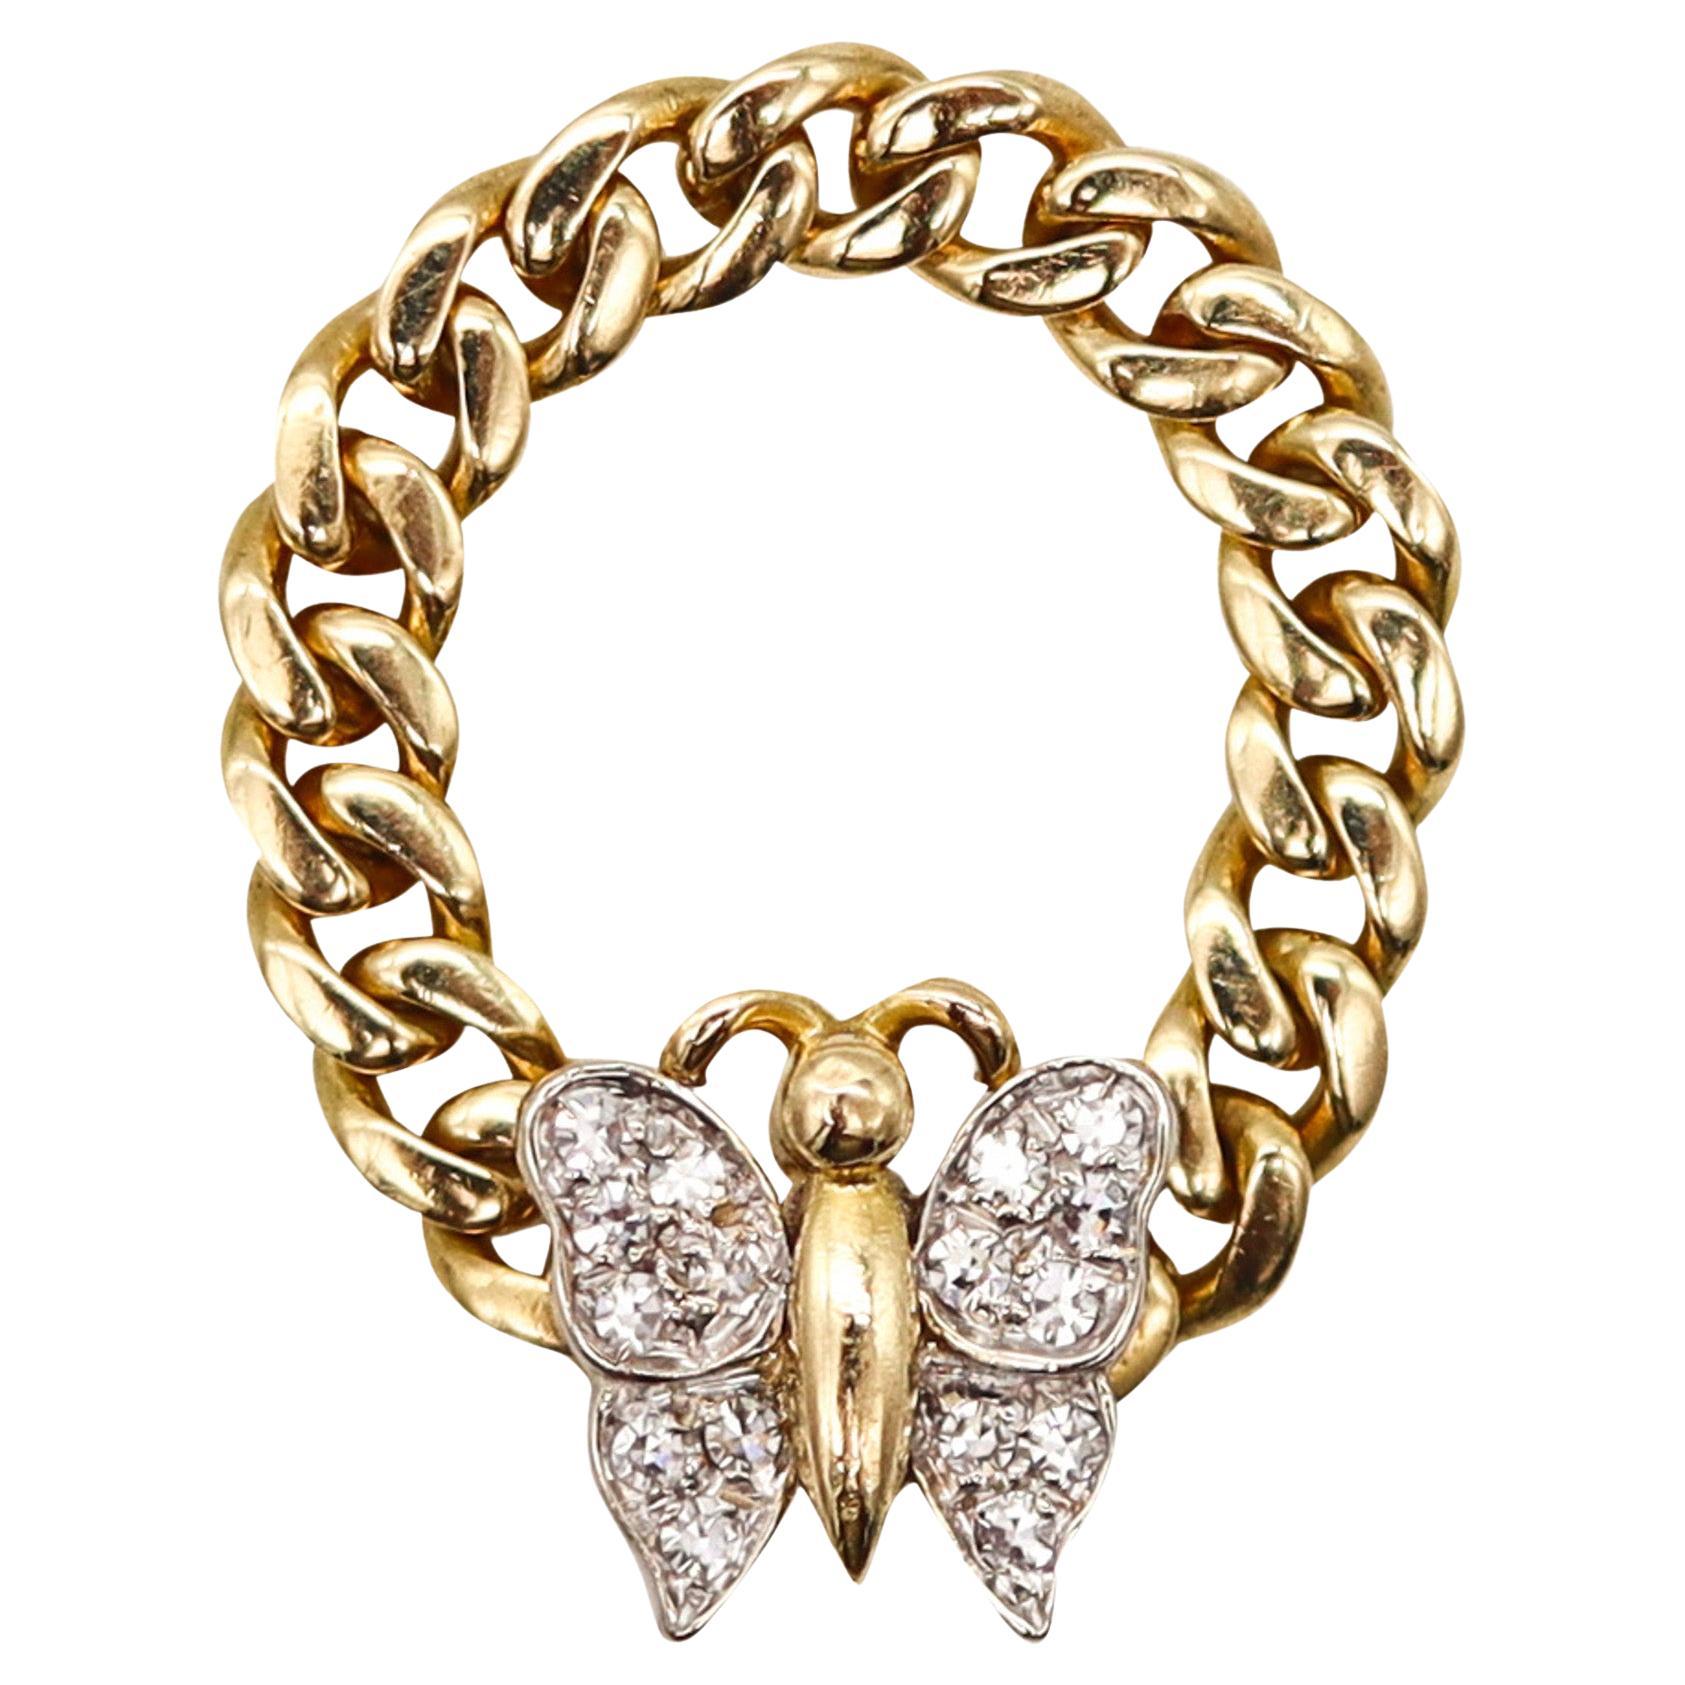 Pomellato Milan Flexible Butterfly Ring In 18Kt Yellow Gold With VS Diamonds